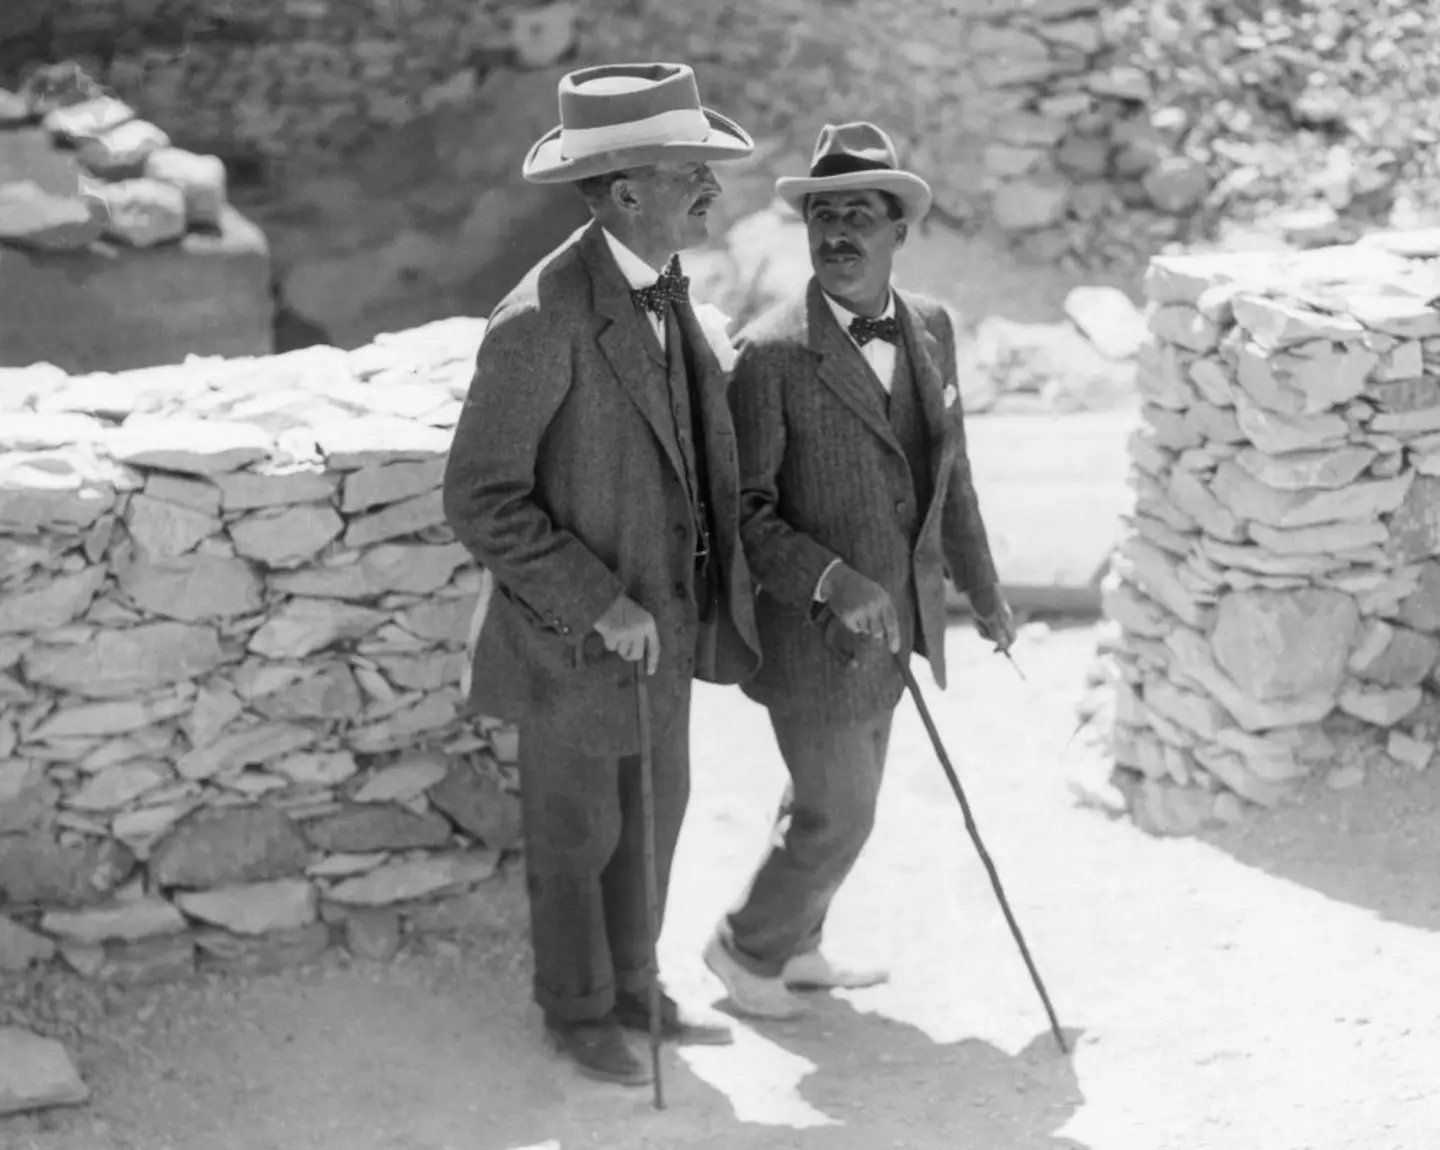 Howard Carter and Lord Carnarvon during the excavation (Hulton Archive/Getty Images)